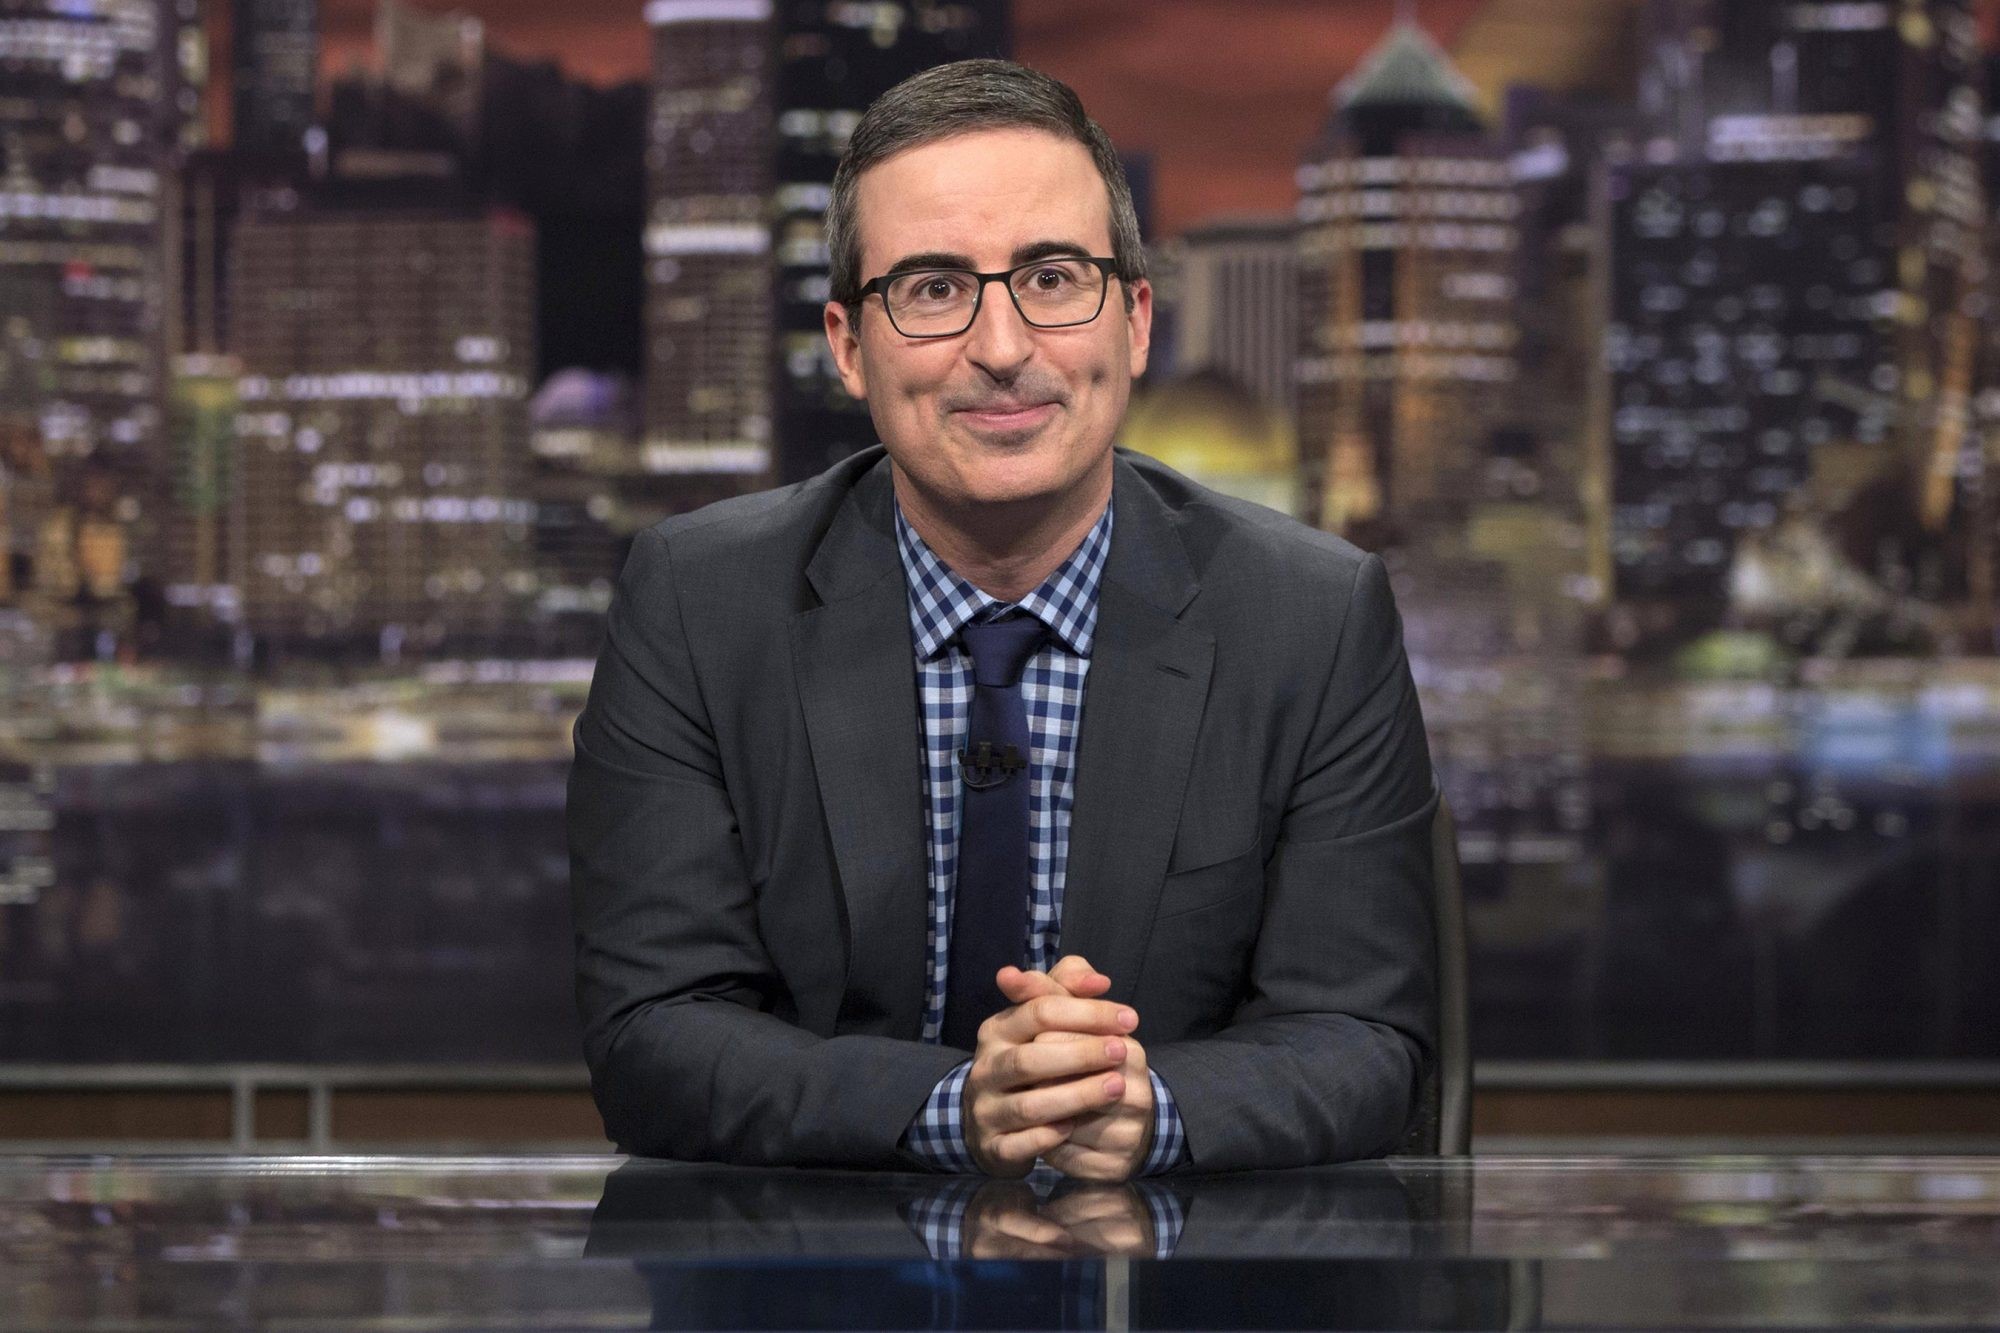 Last Week Tonight episodes related to privacy